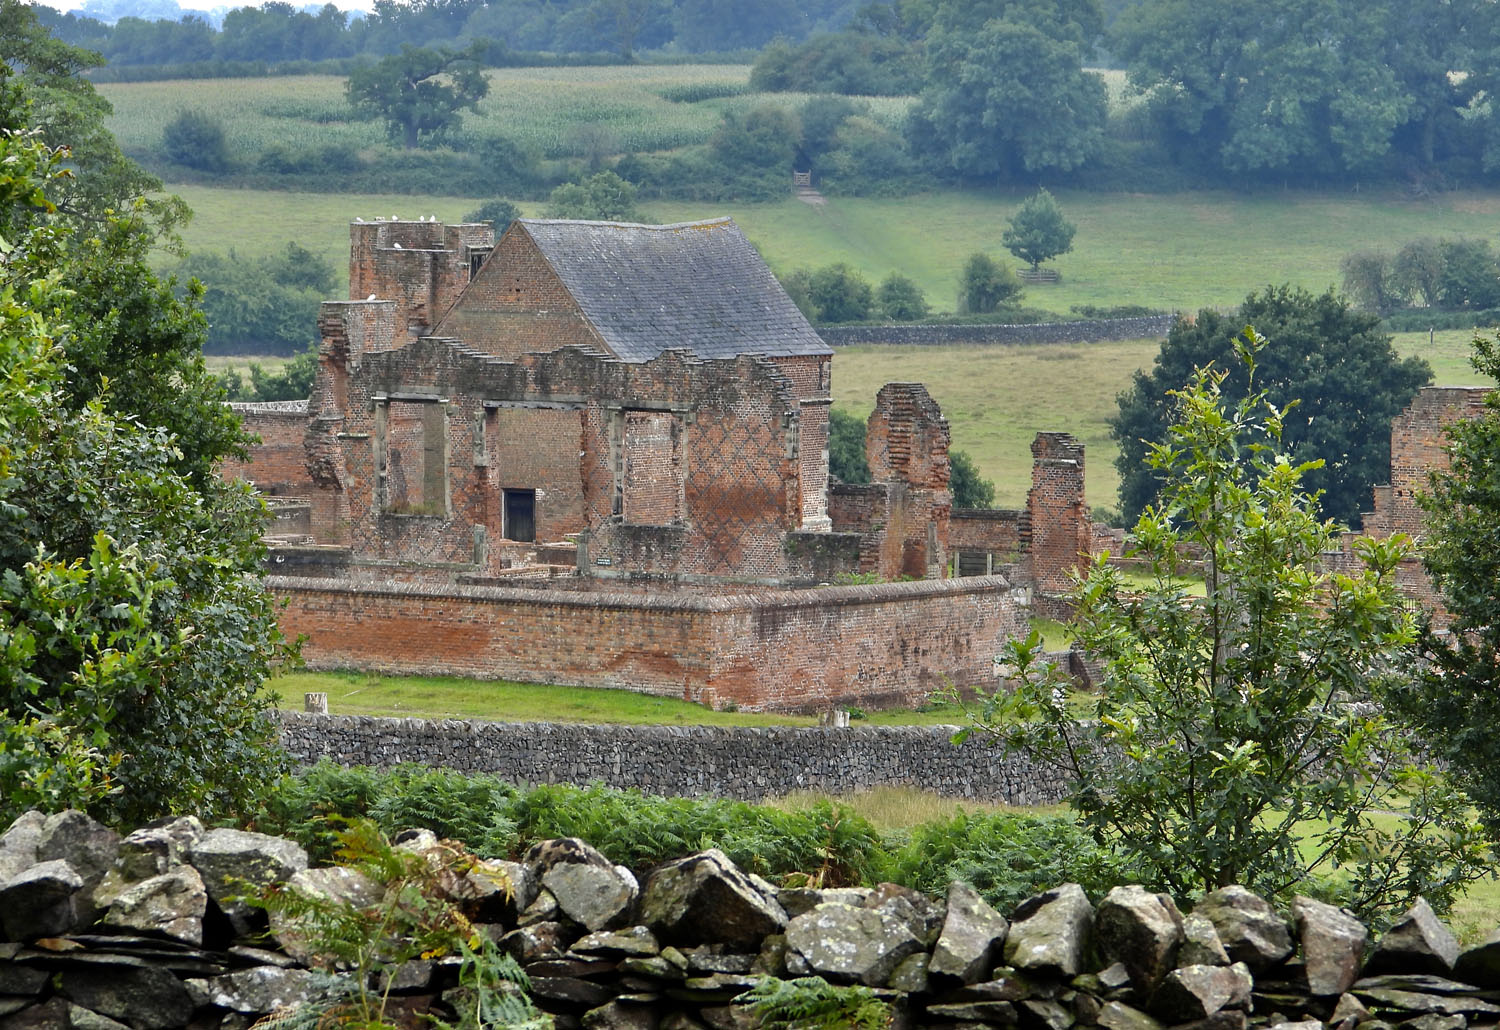 The ruins of the old Bradgate House in Bradgate Park